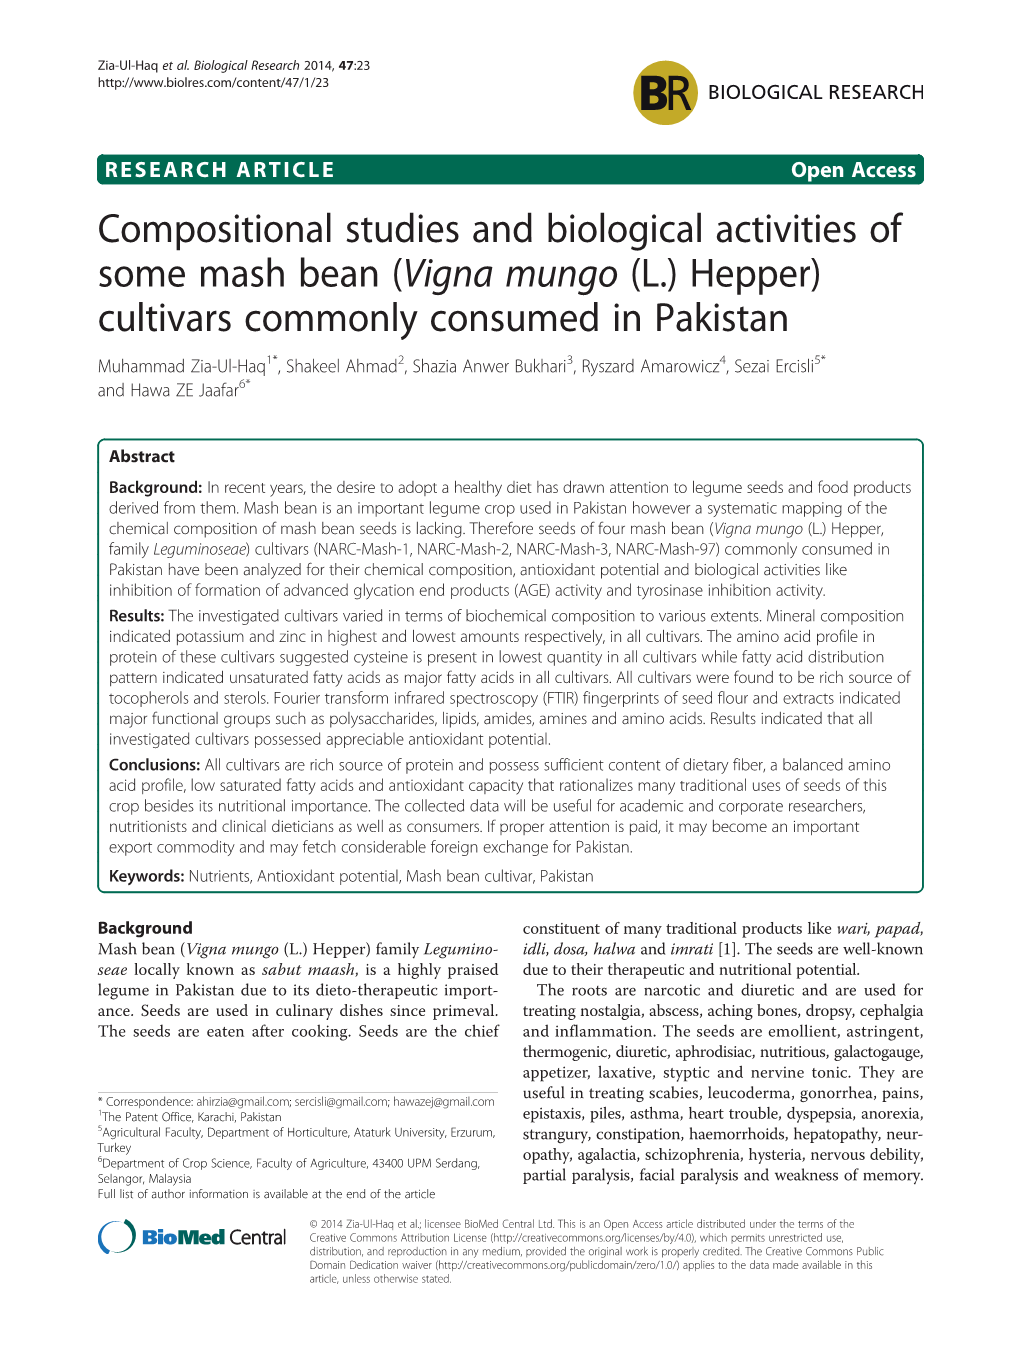 Compositional Studies and Biological Activities Of